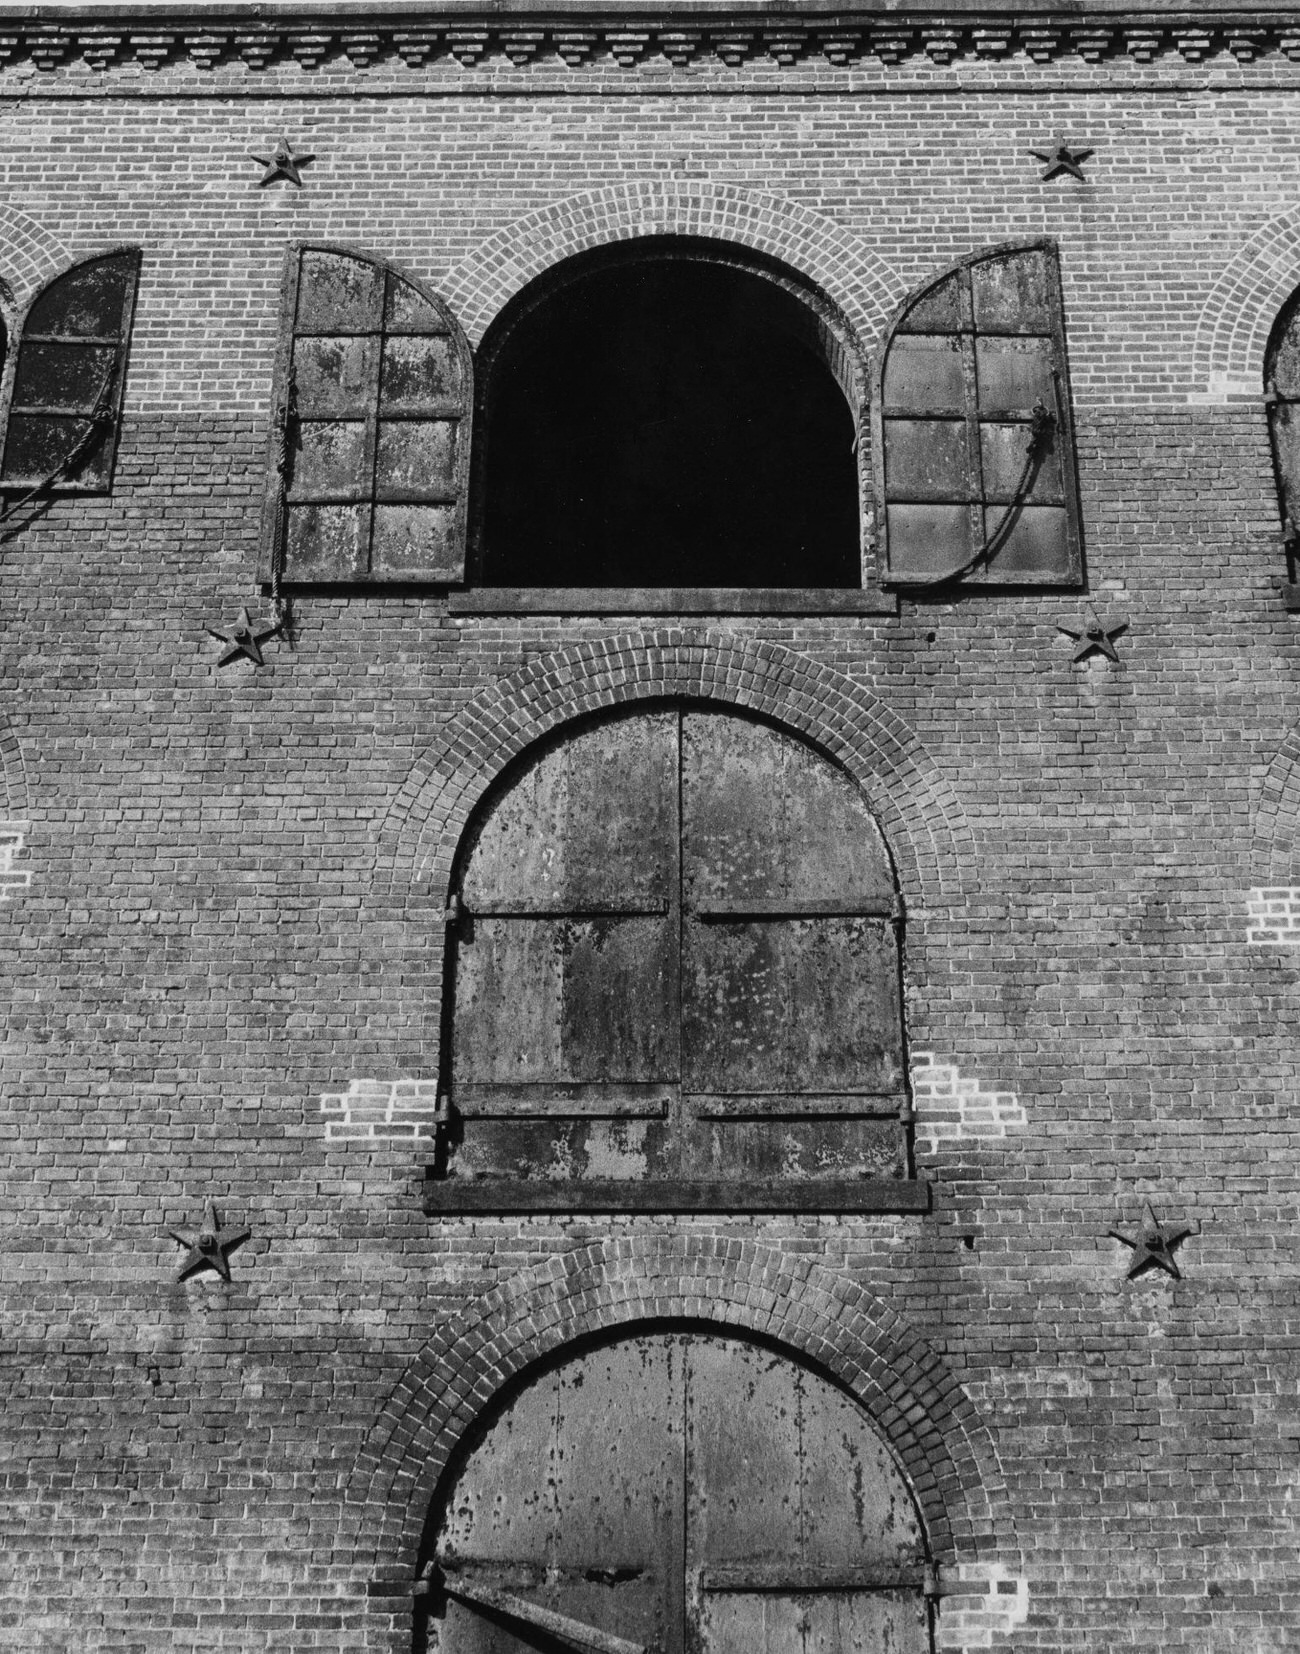 Shuttered Windows Of The Empire Stores At 53-83 Water Street, Brooklyn, 1975.